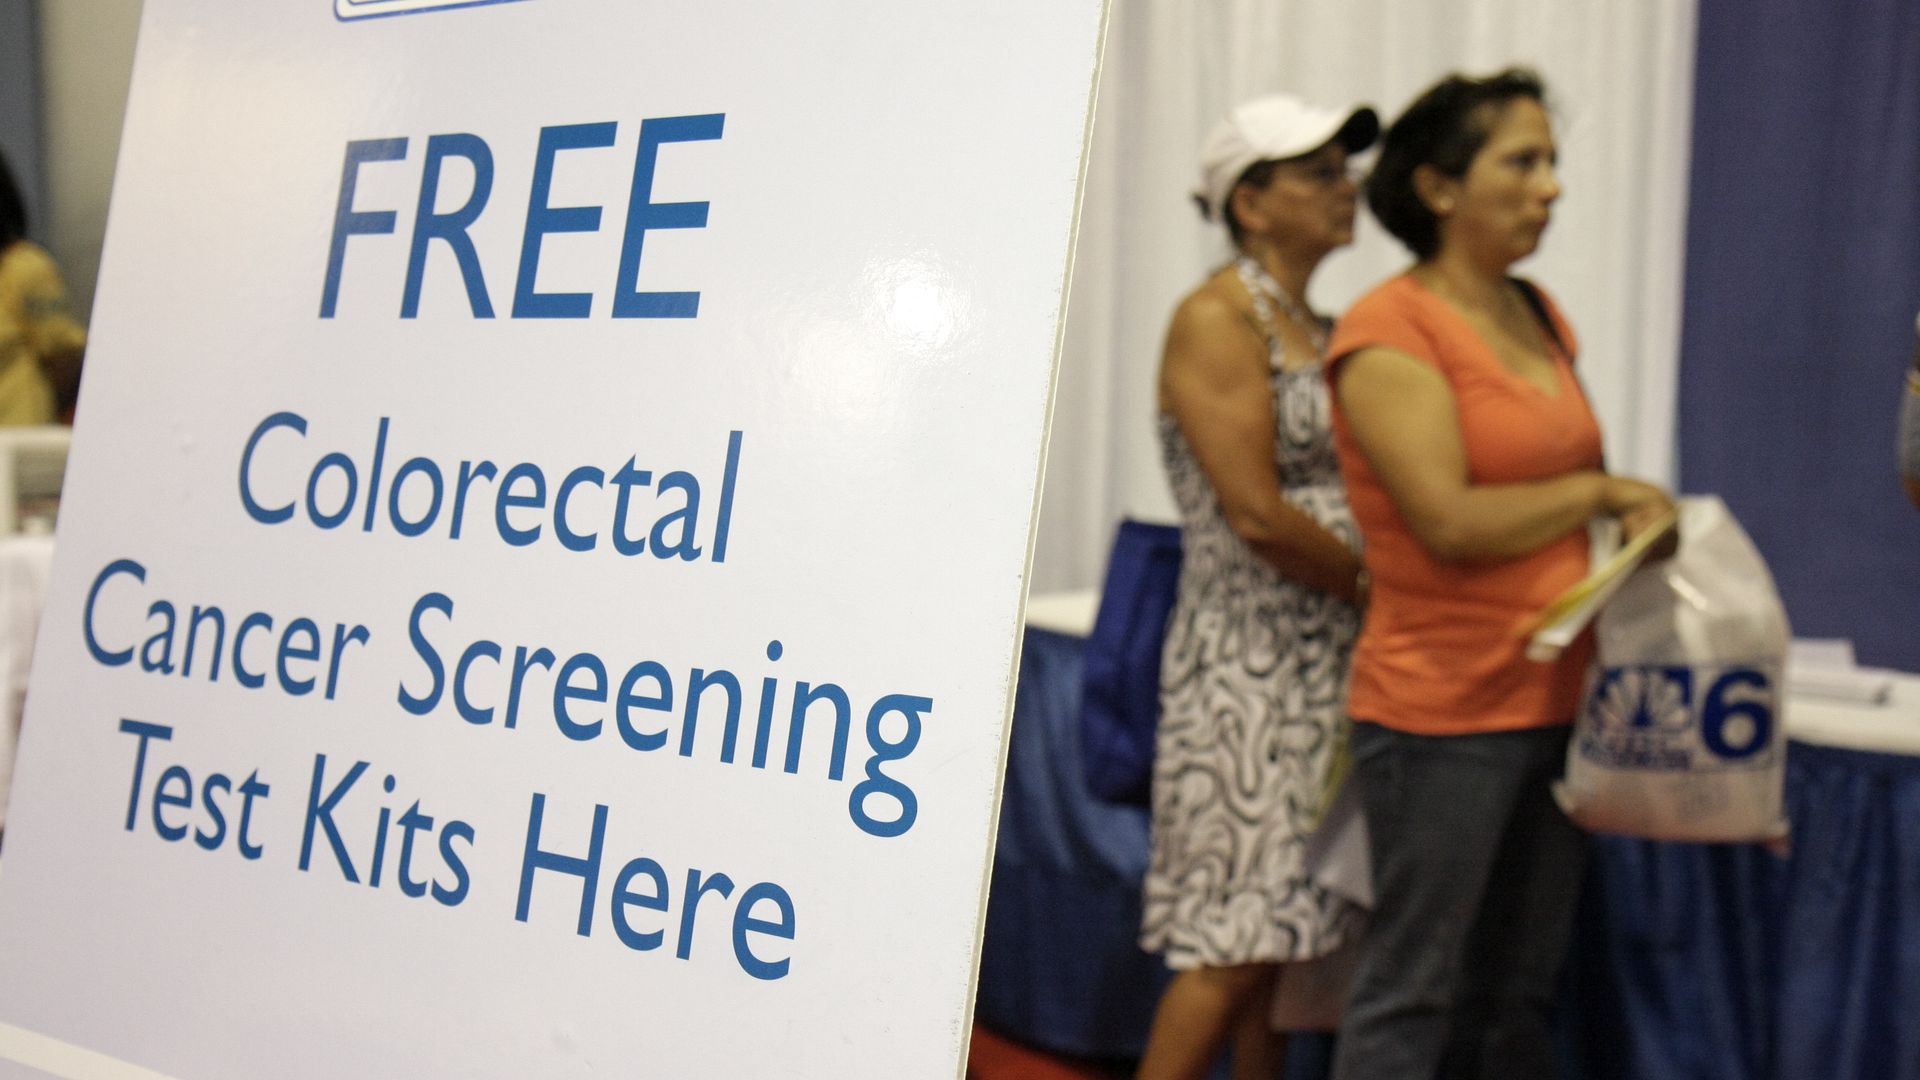 Sign advertising free colorectal cancer screening test kits.